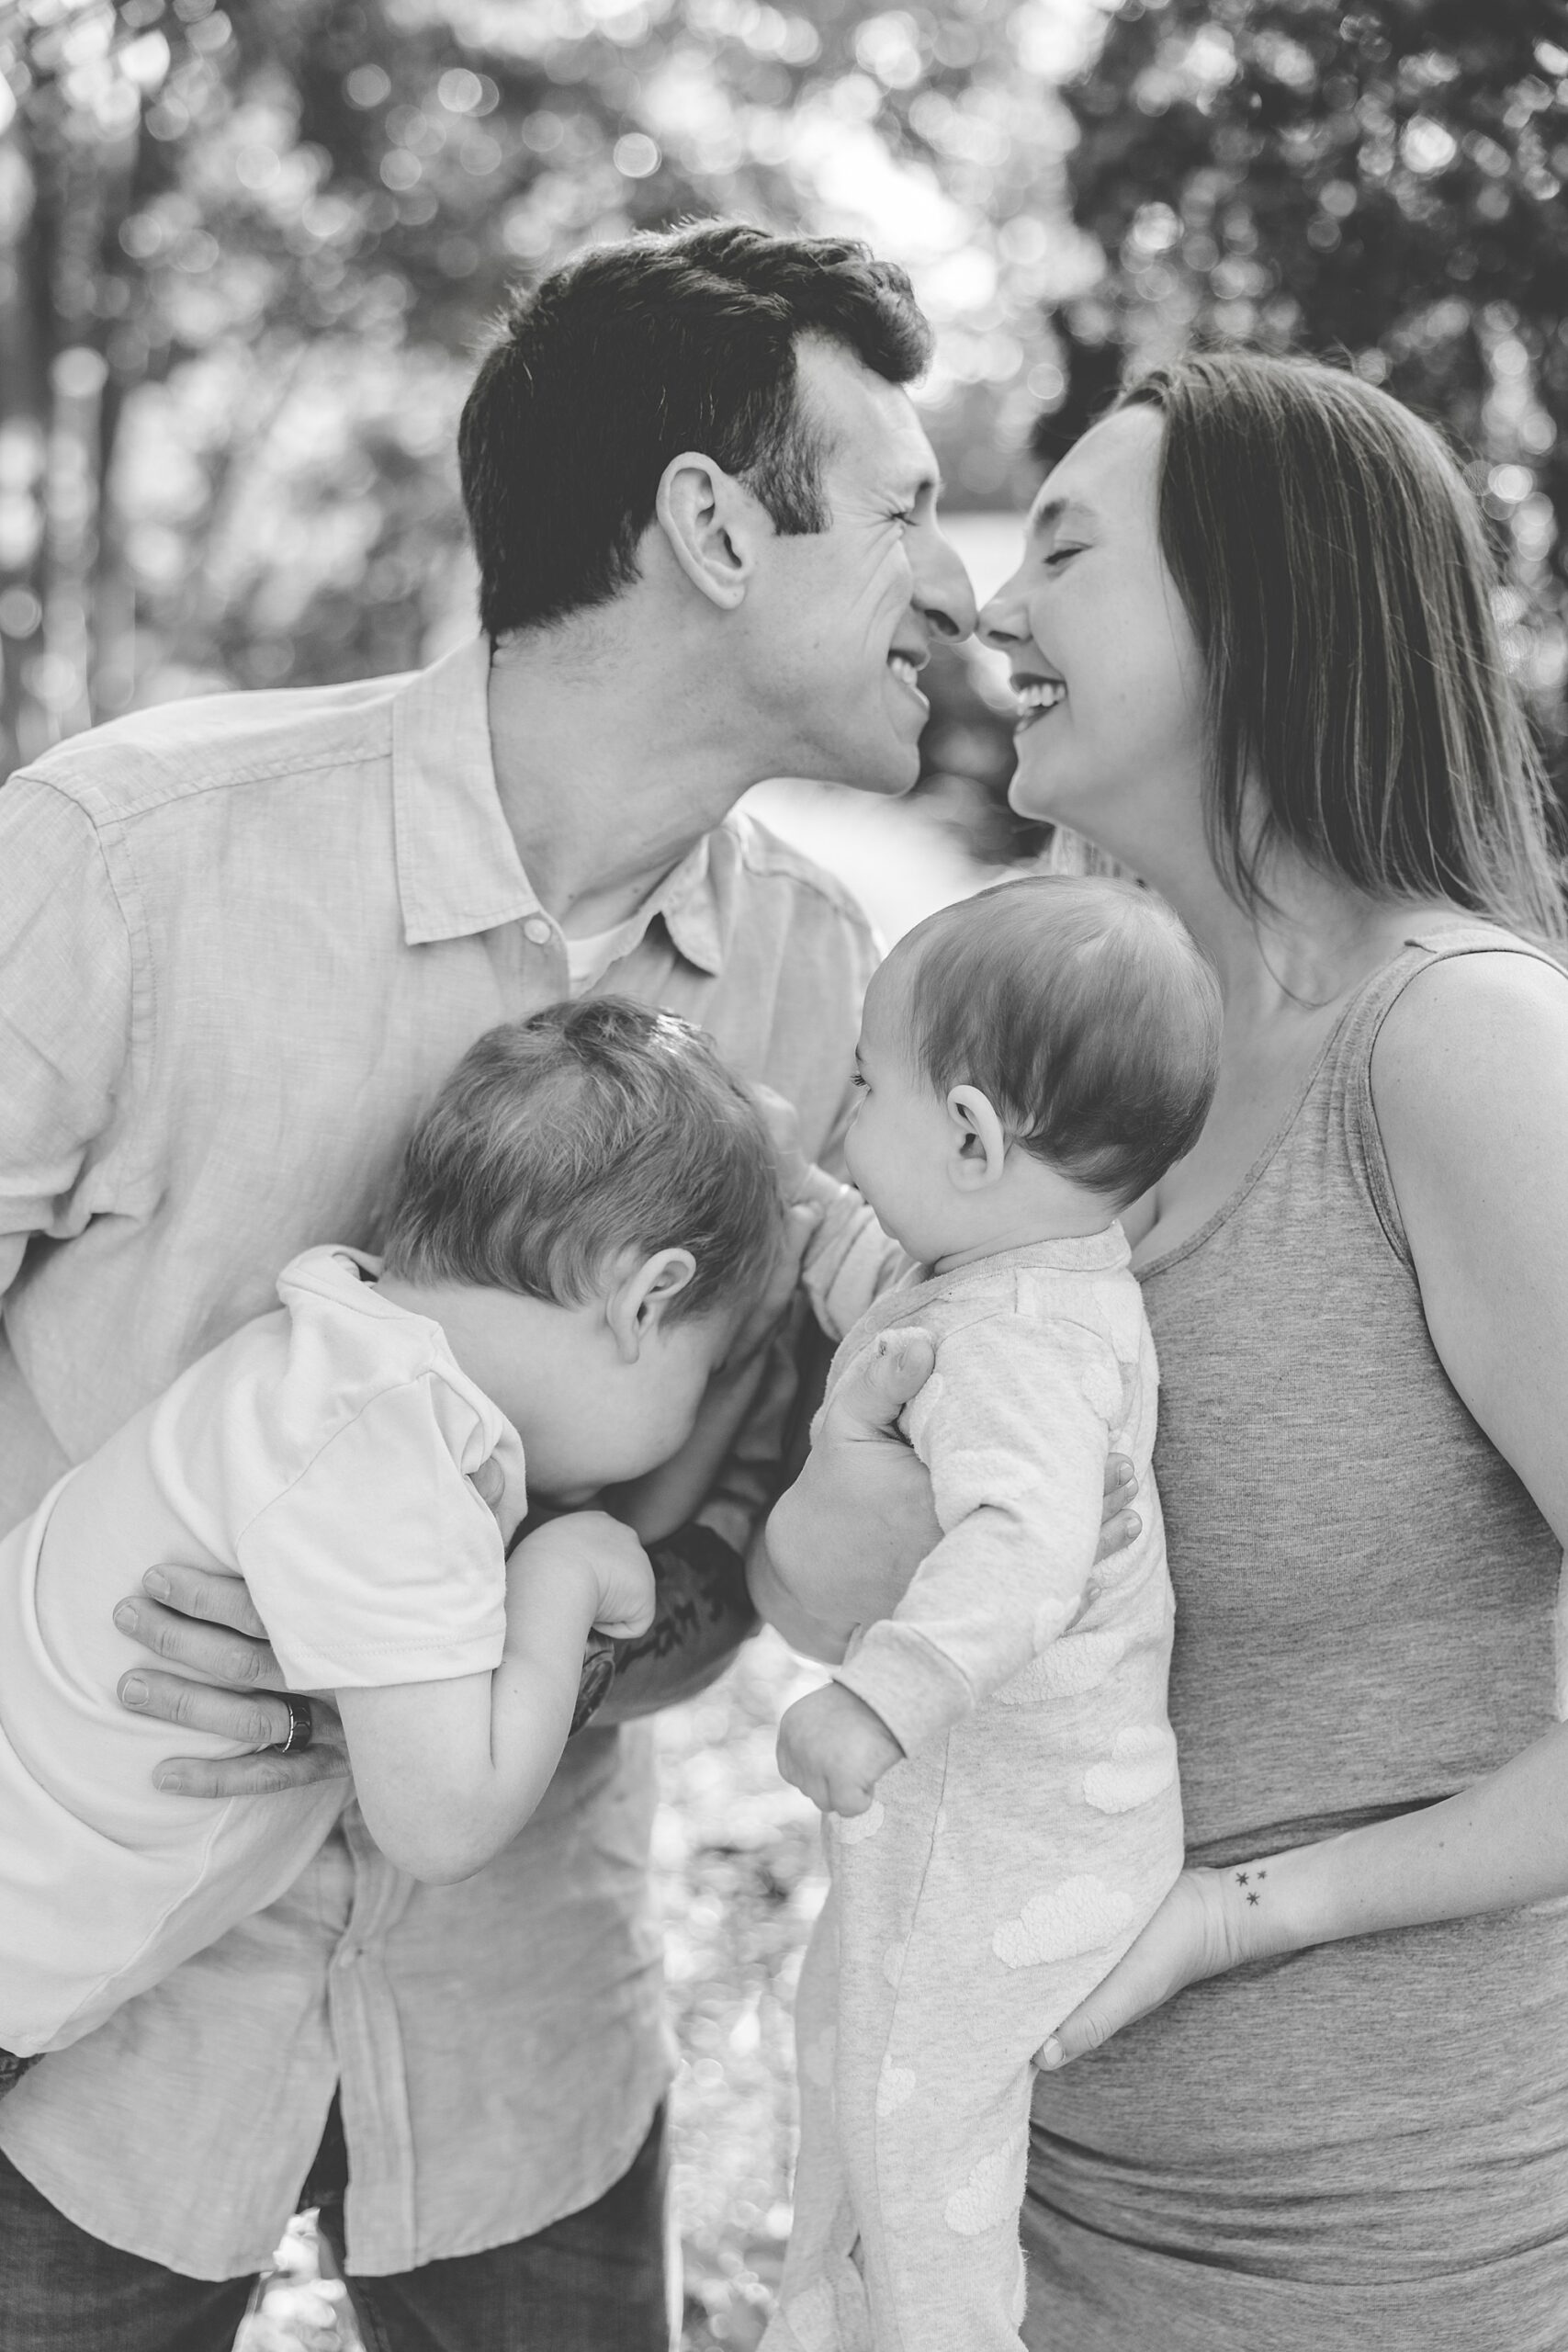 Christina Tundo Photography, Maryland family photographer, interviews long-time clients to see what they love about working with CTP!